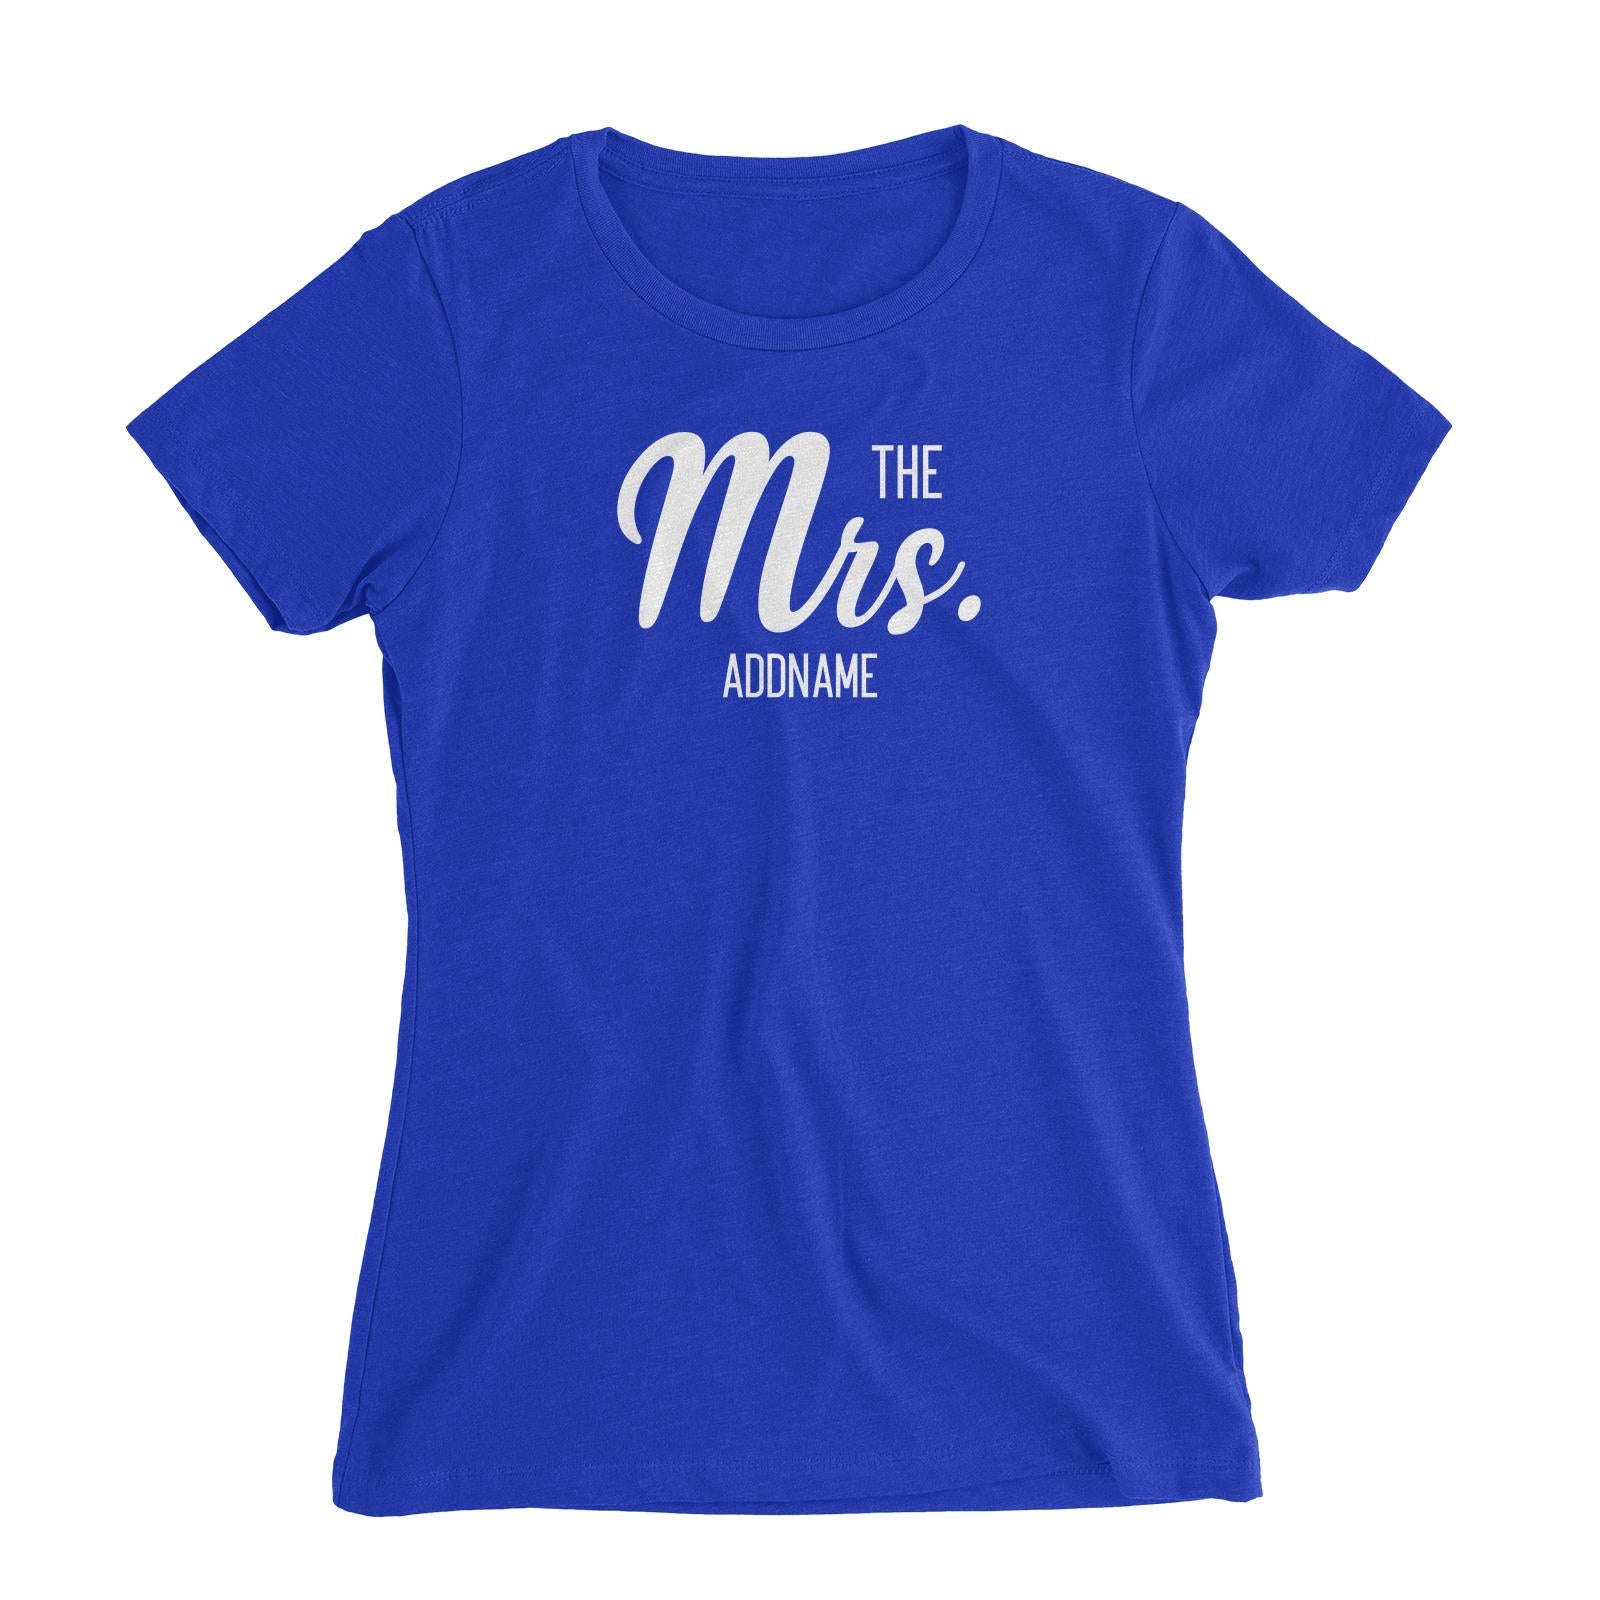 Husband and Wife The Mrs. Addname Women Slim Fit T-Shirt